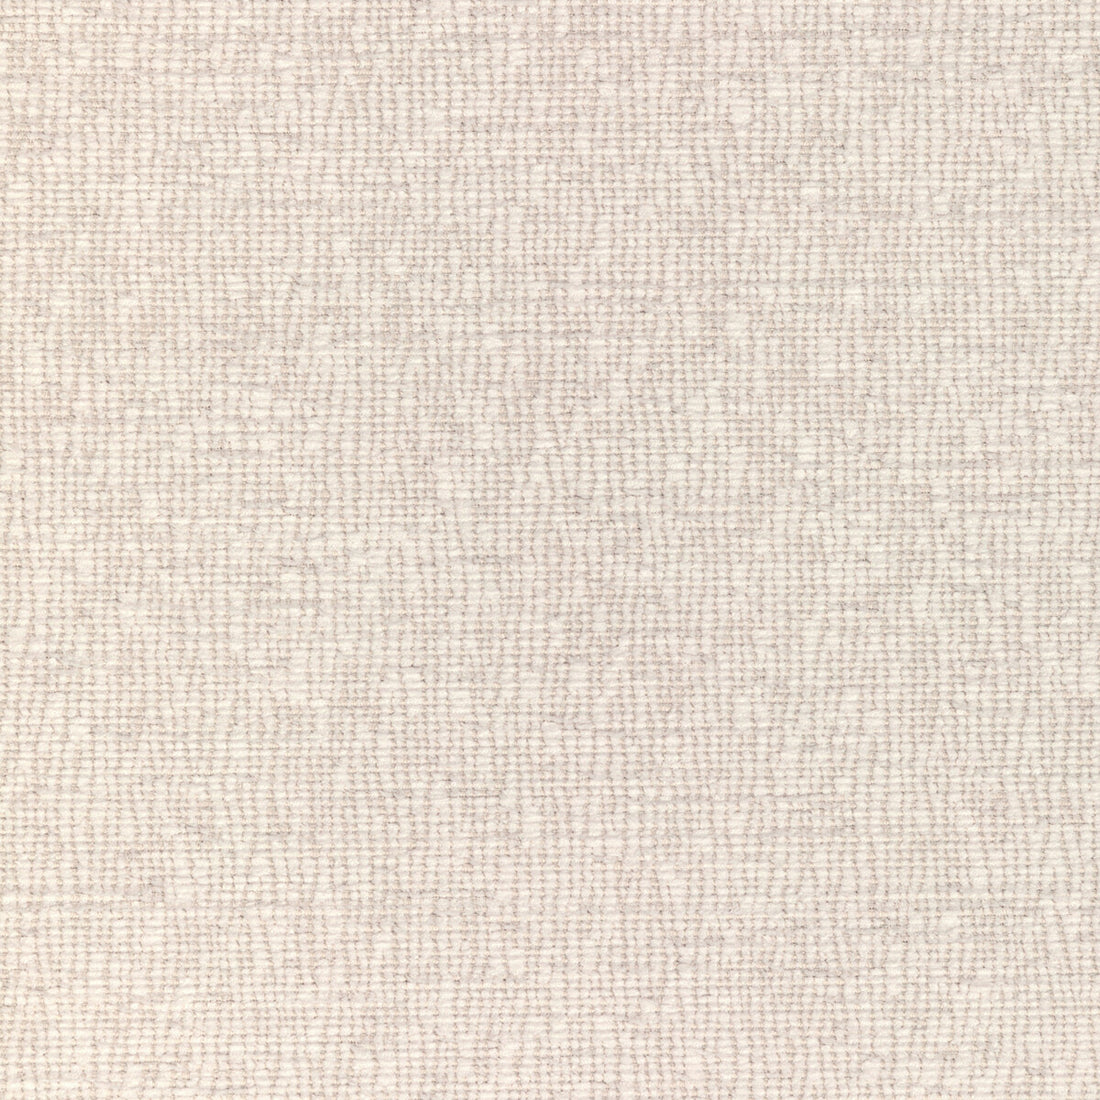 Wash Away fabric in salt color - pattern 36387.1.0 - by Kravet Design in the Crypton Home - Celliant collection